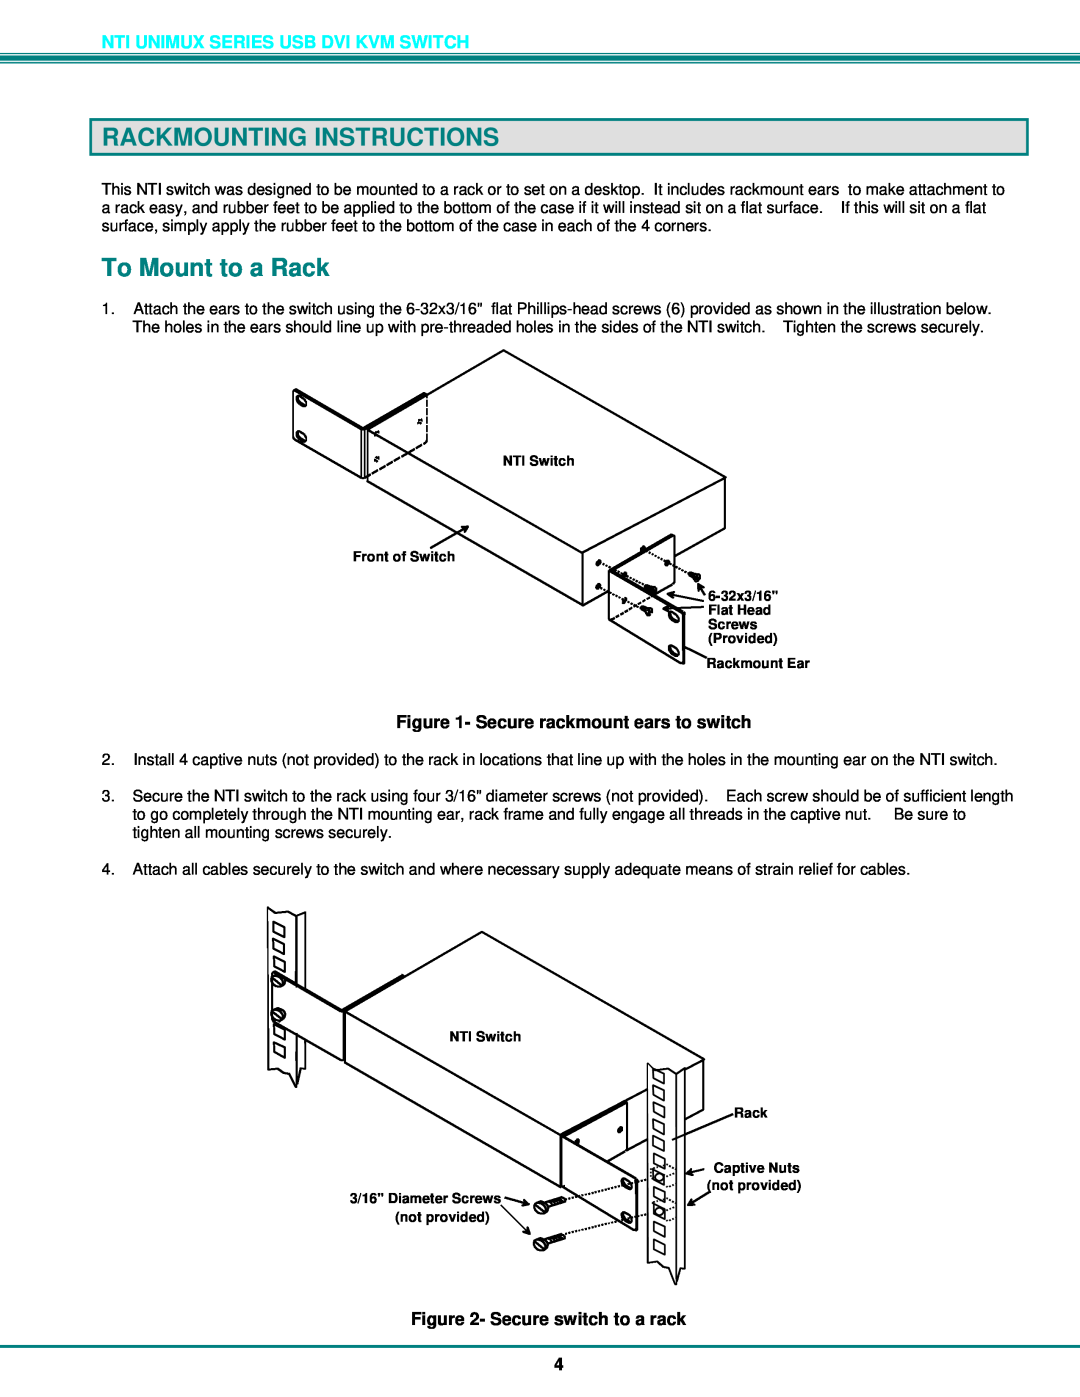 Network Technologies DVI-4 operation manual Rackmounting Instructions, To Mount to a Rack, Secure rackmount ears to switch 